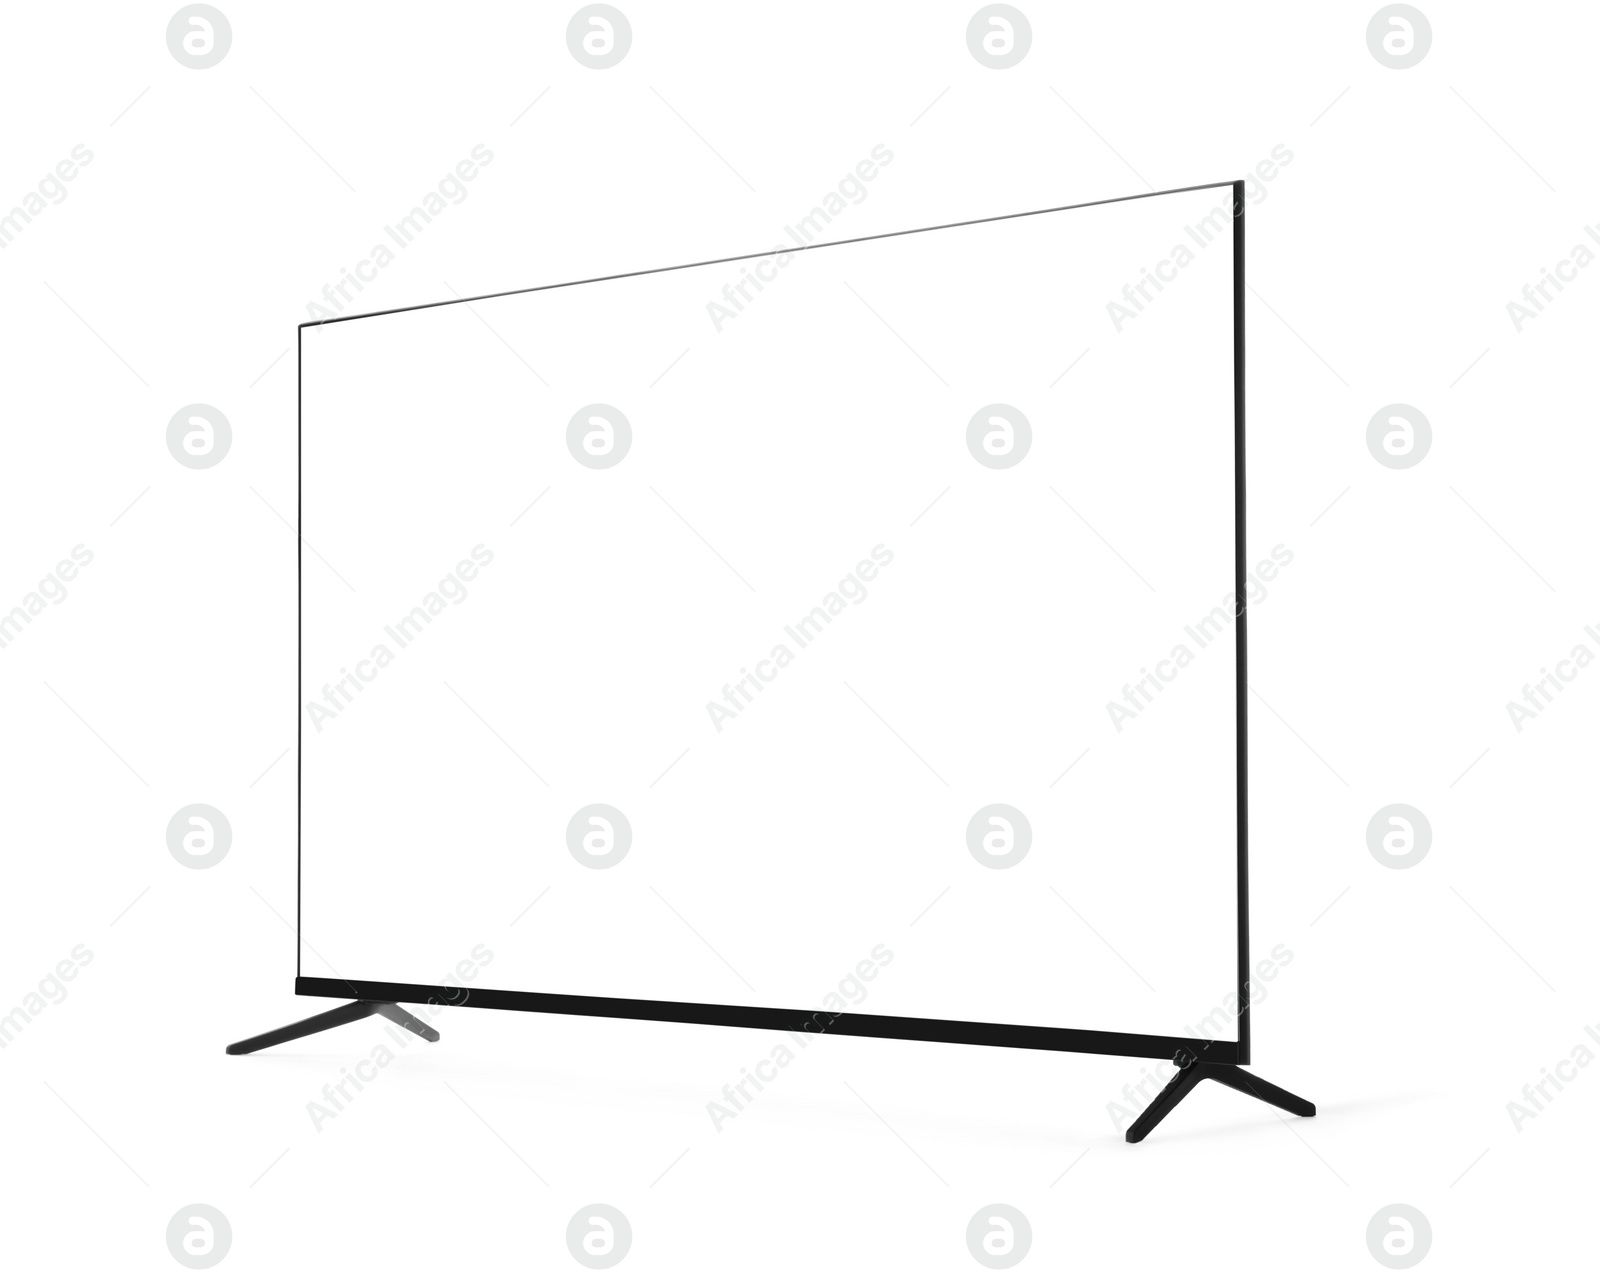 Image of Wide TV with blank screen isolated on white